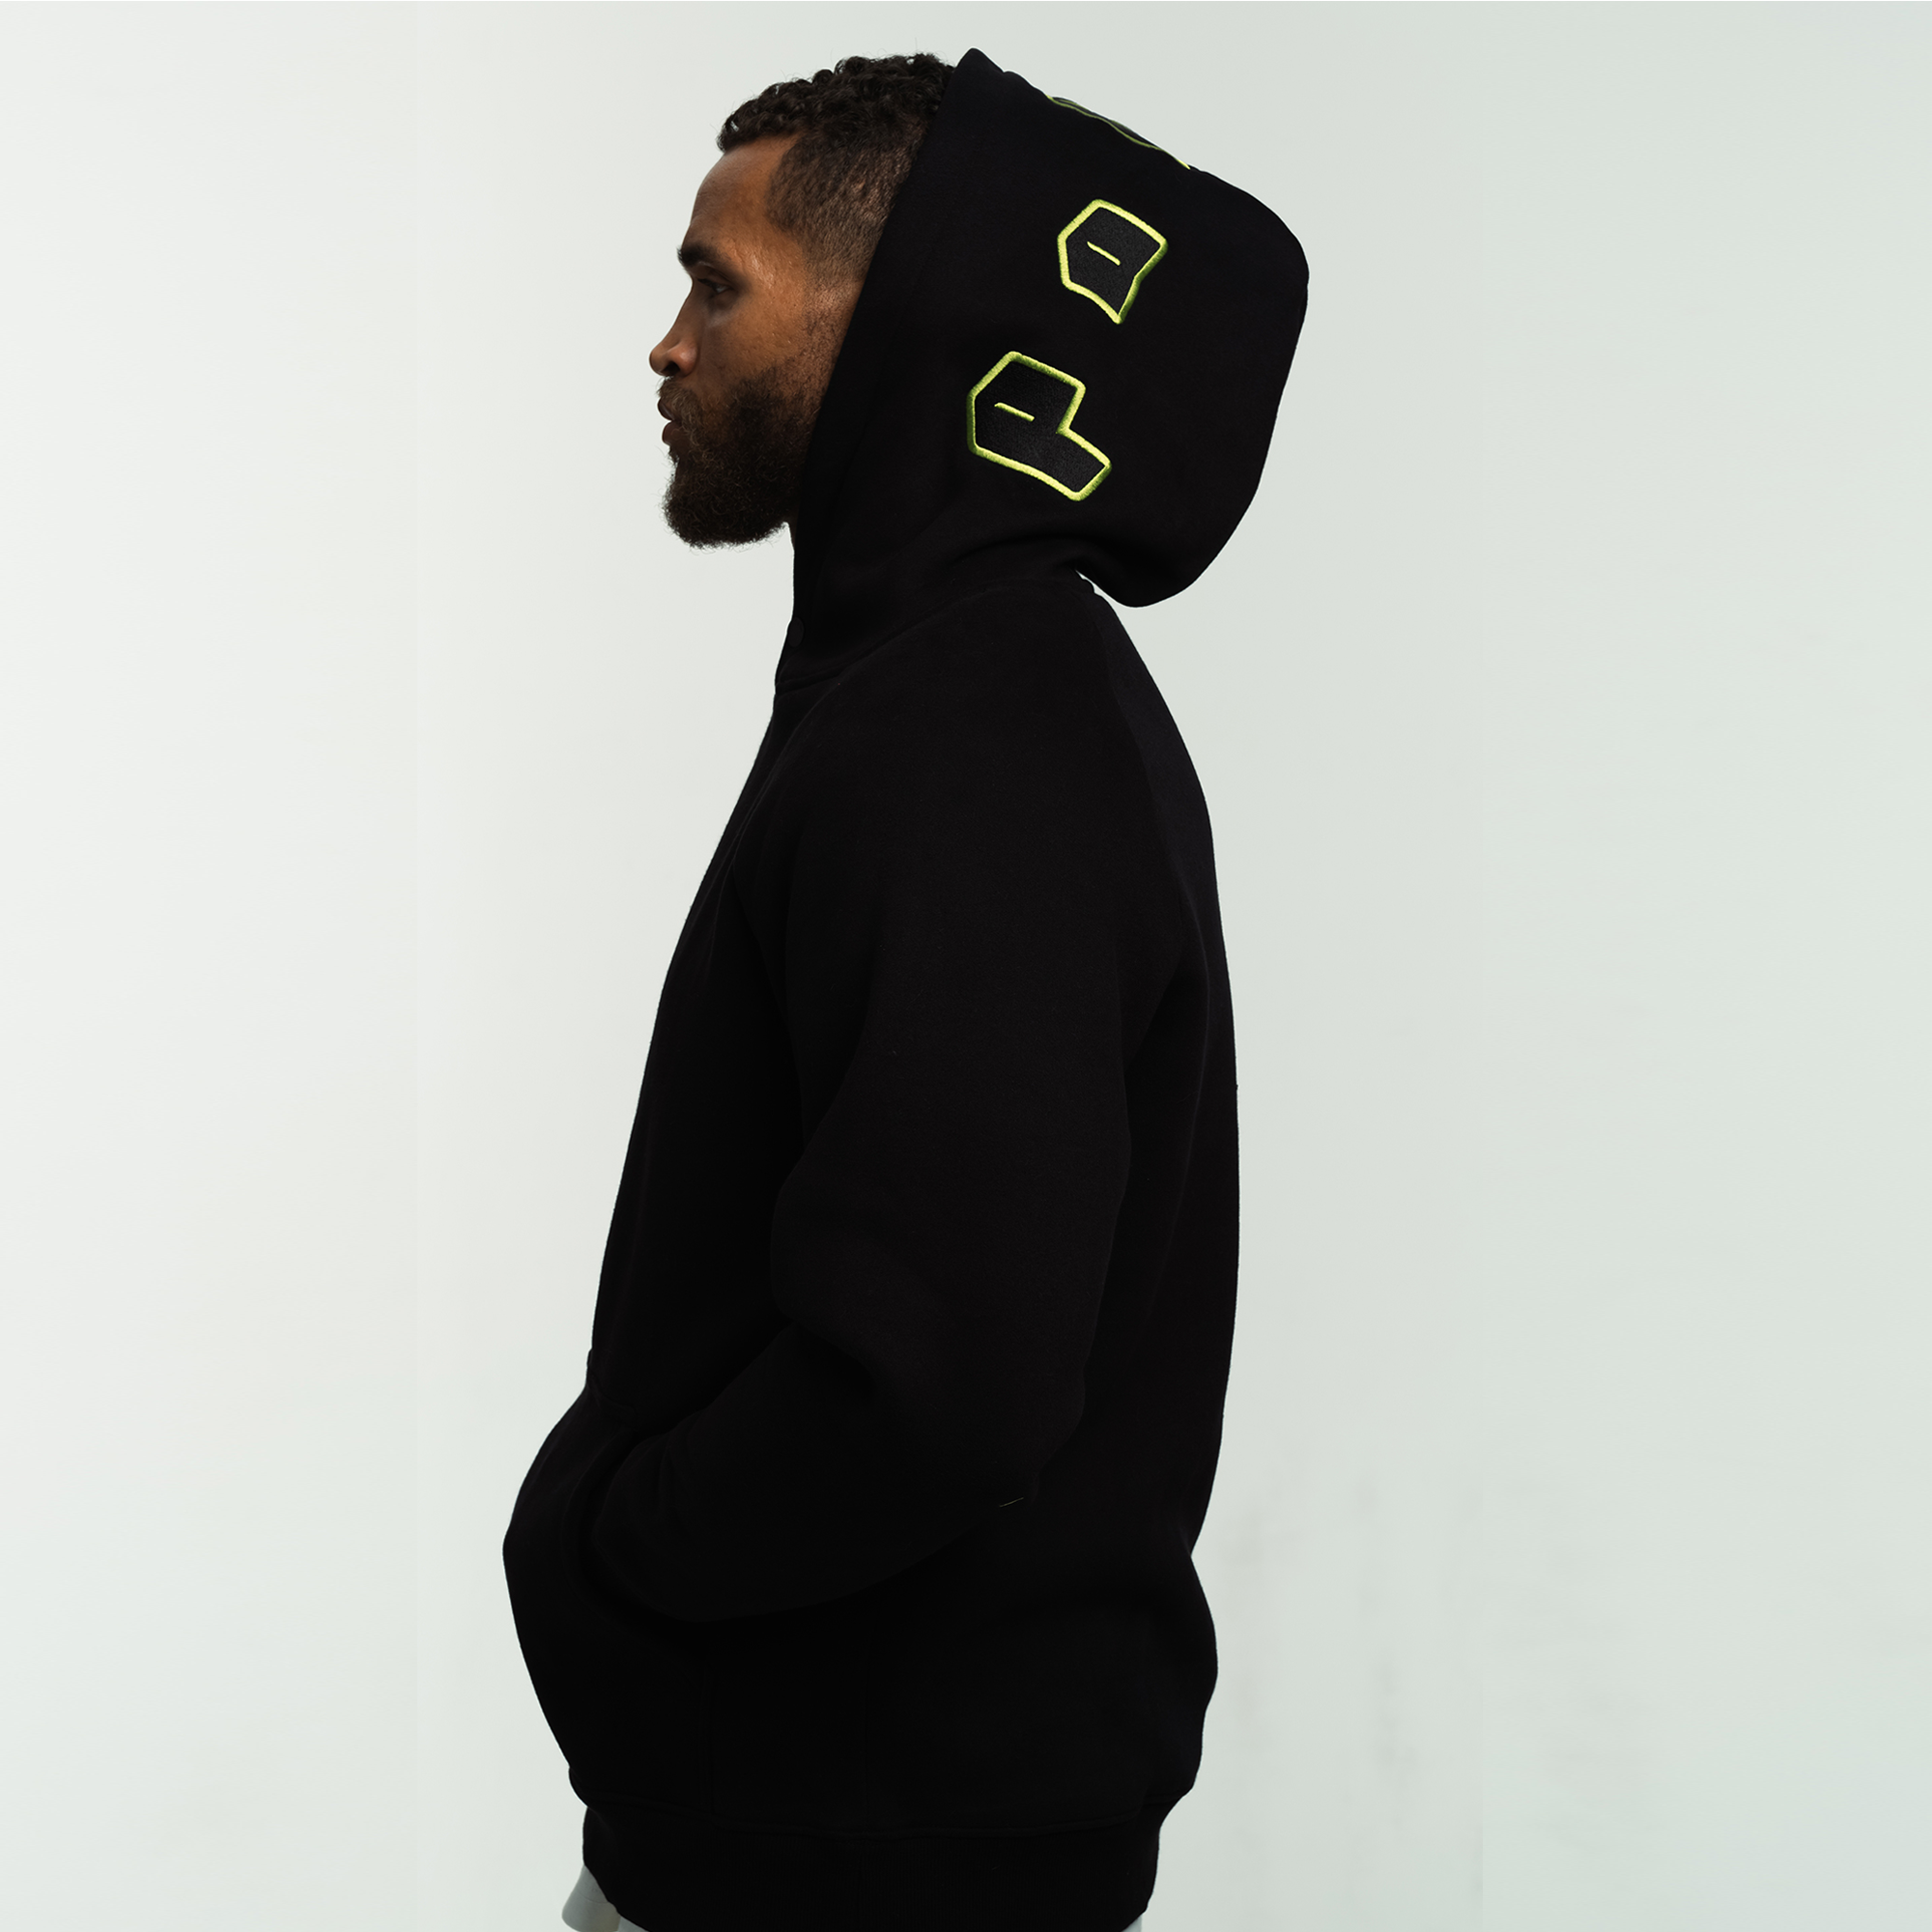 Side View of the Patch Signature Embroidered Hoody worn by a model